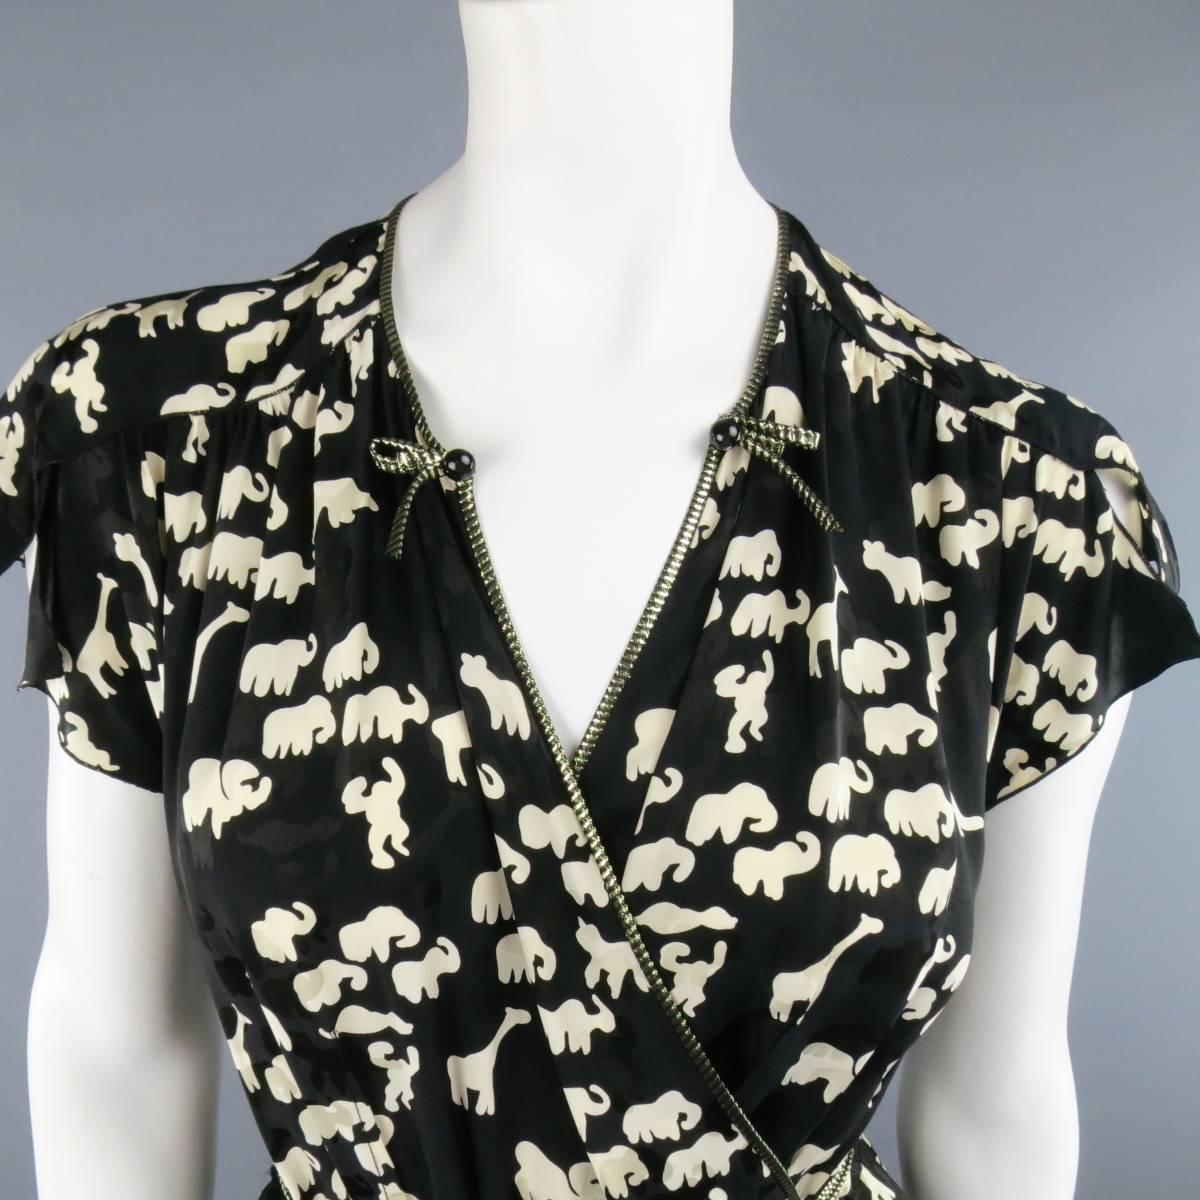 MARC JACOBS wrap blouse in a black and beige animal print featuring short slit sleeves, metallic gold piping, v neck with bow applique, and long wrap and tie closure. Made in USA.
 
Excellent Pre-Owned Condition.
Marked: 4 USA
 
Measurements:
